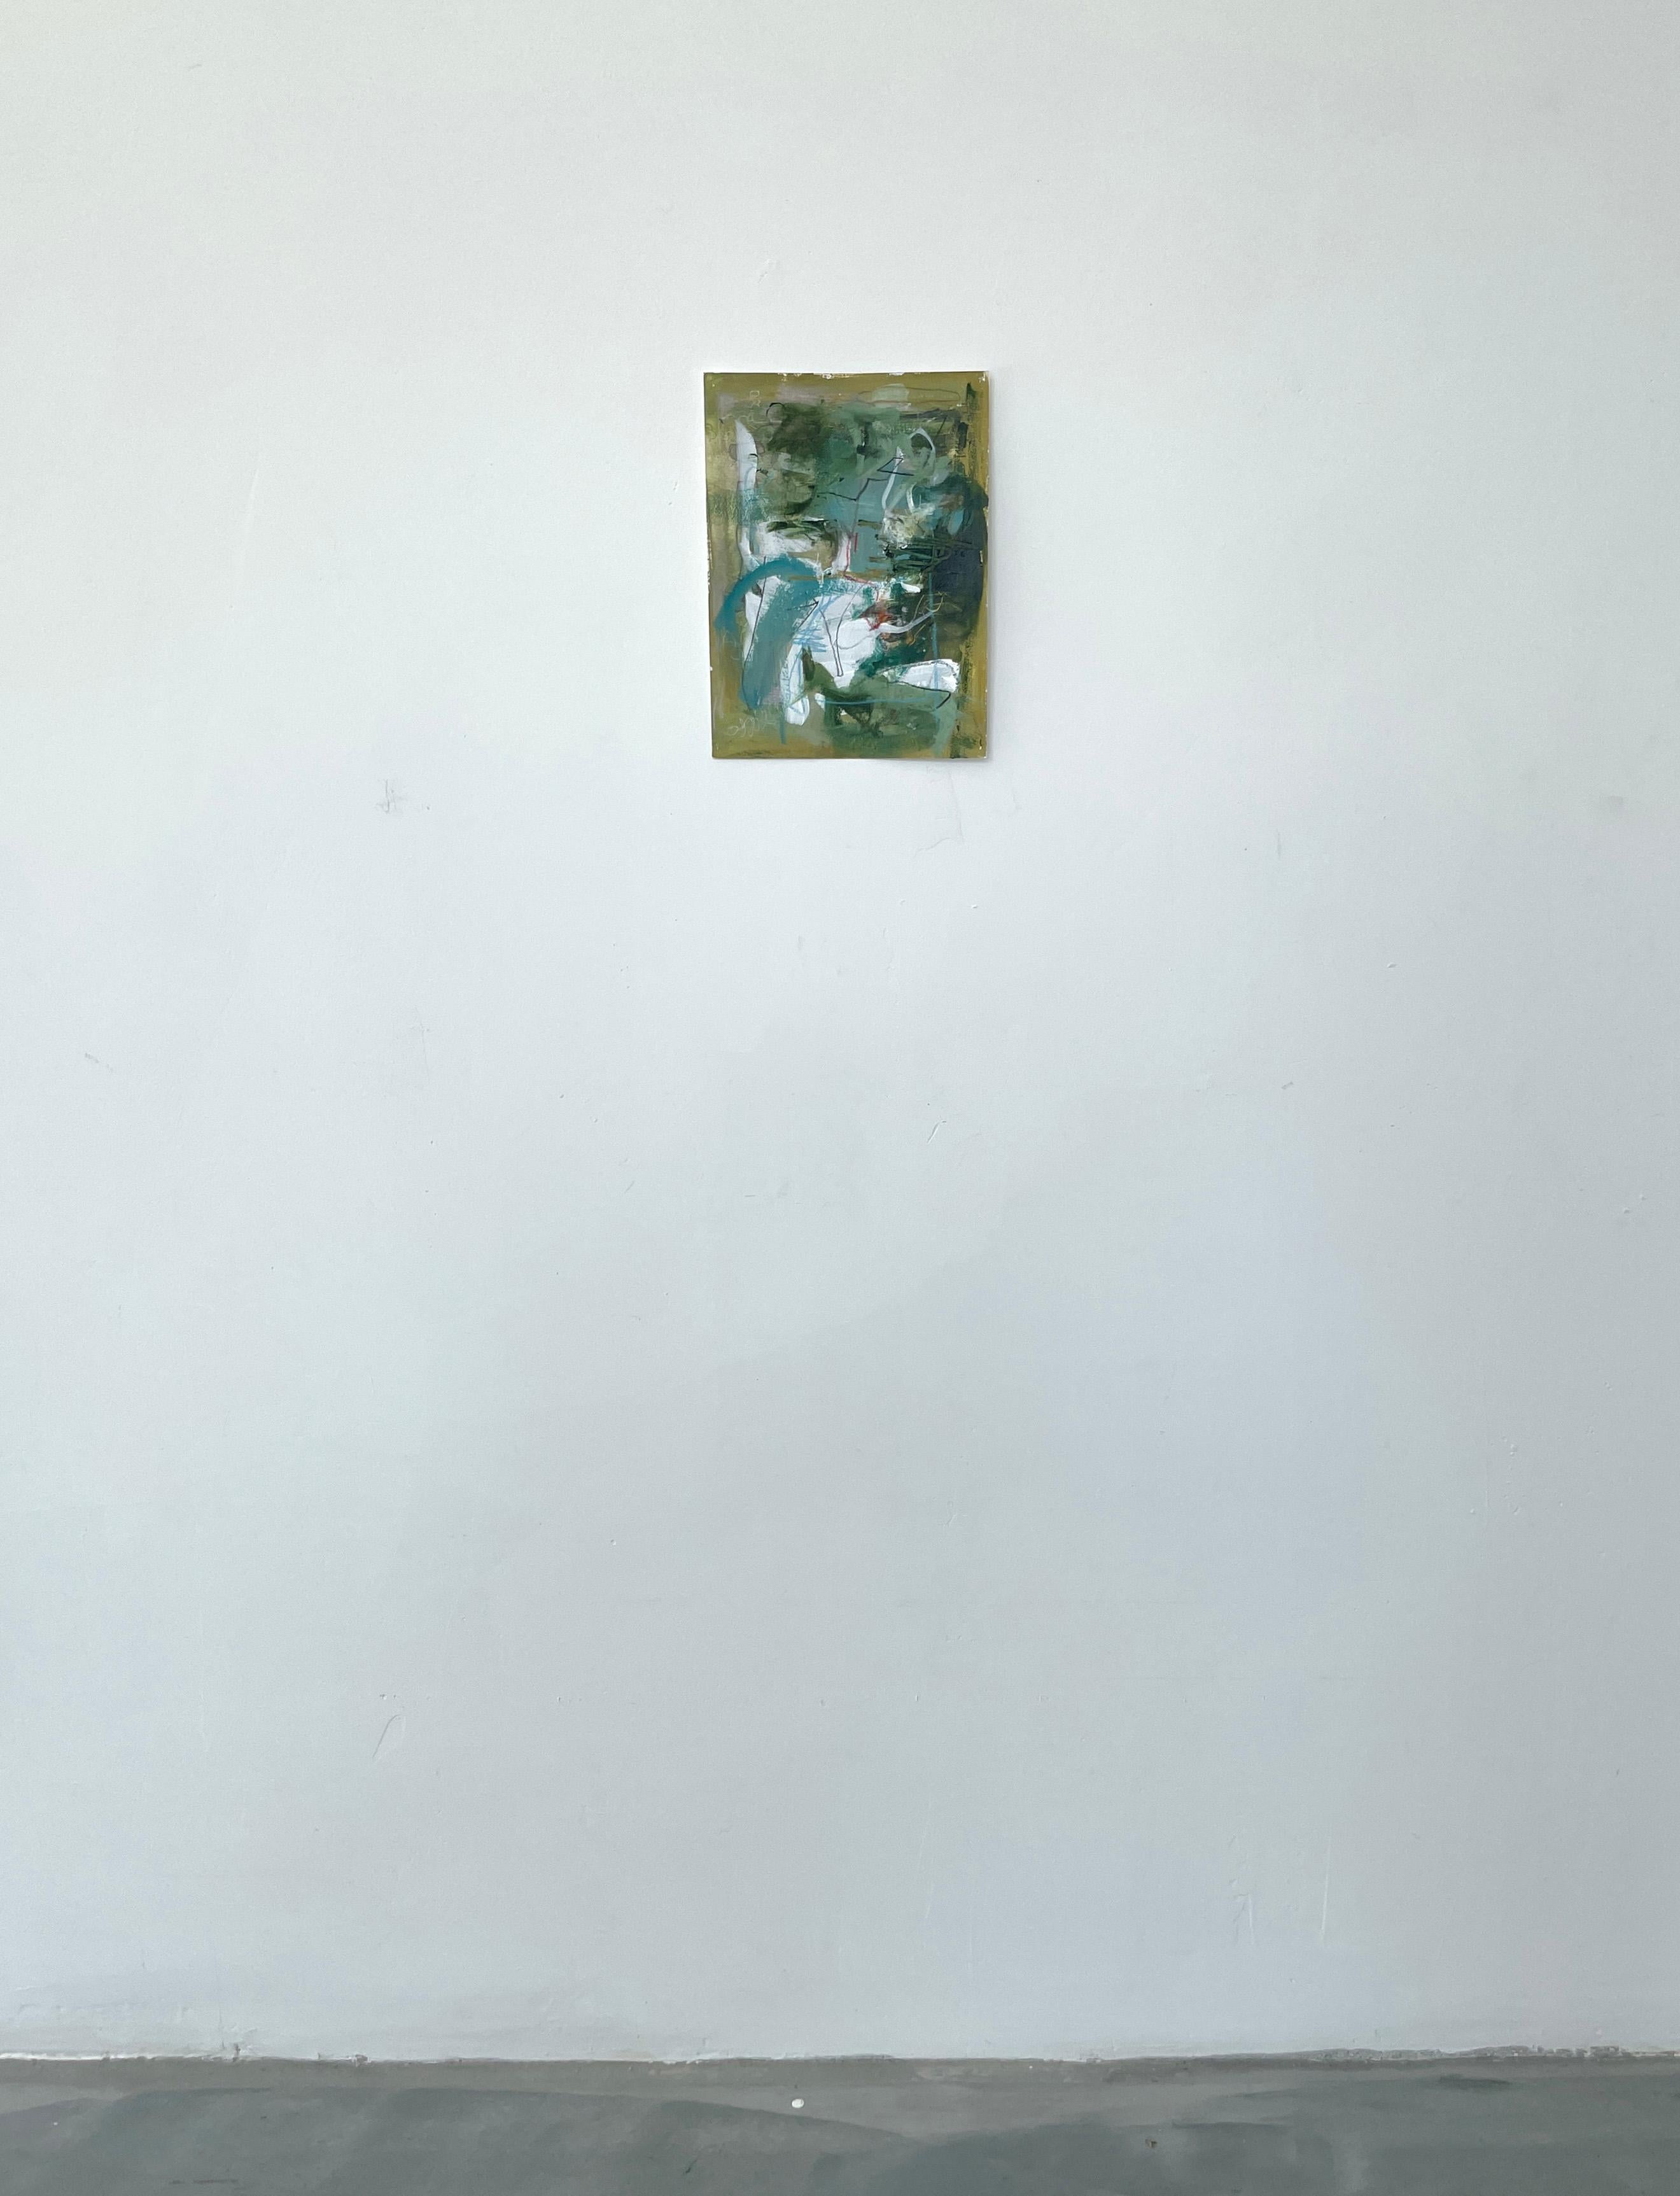 Small Works on Paper, Untitled #11 - Painting by Stephanie Visser 